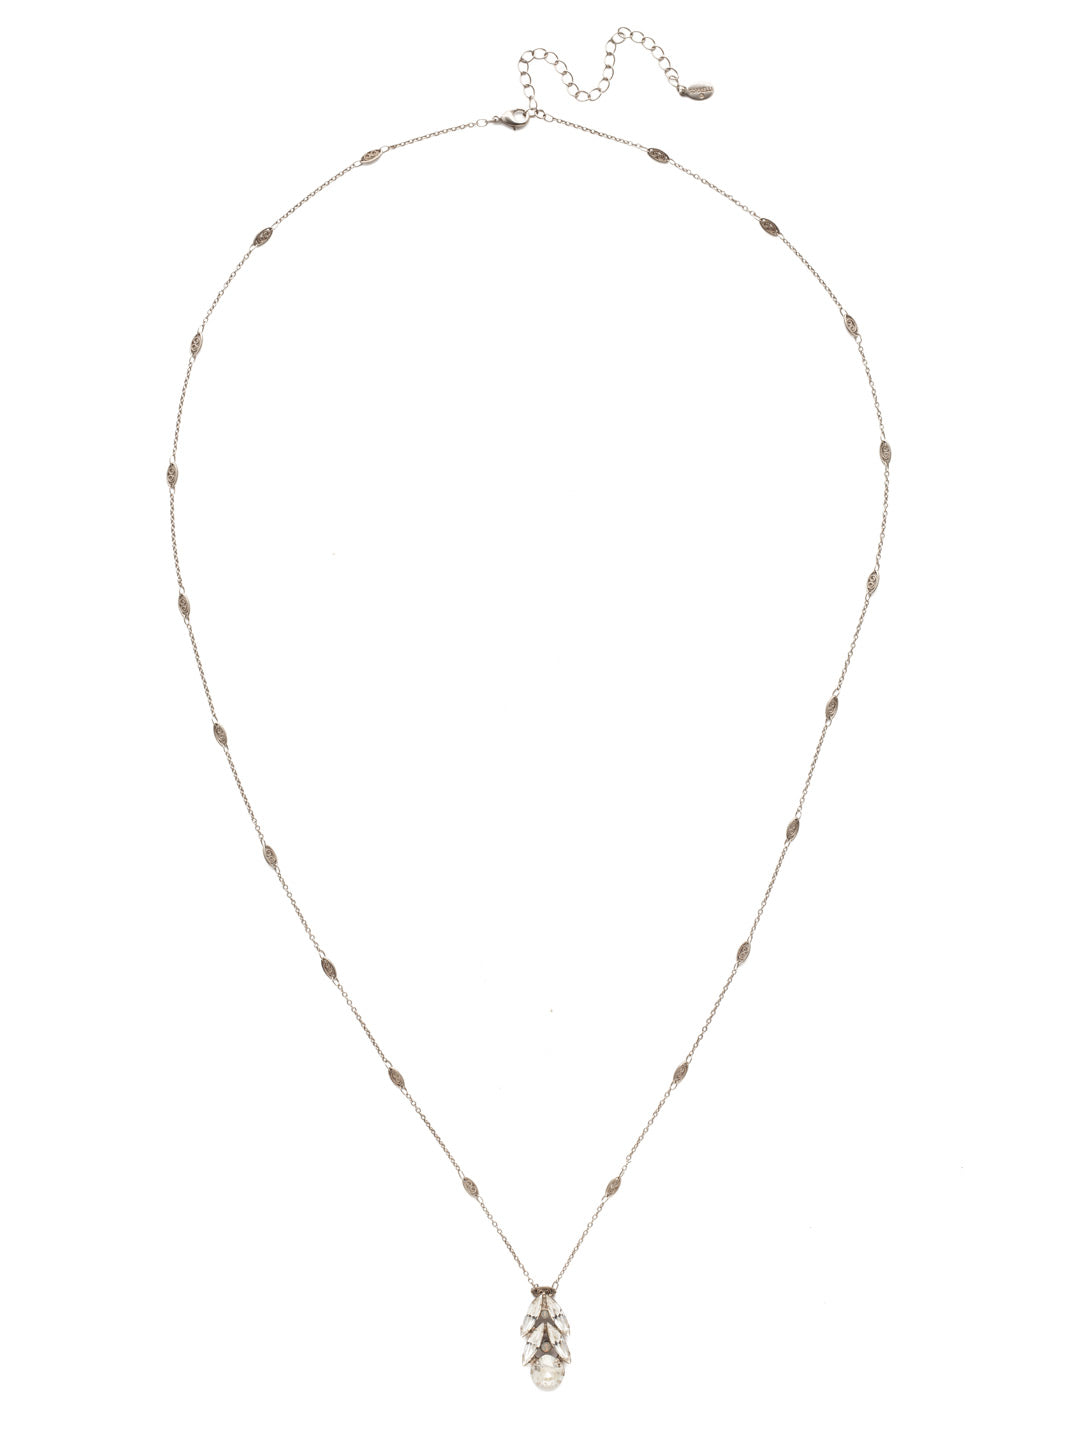 Hannah Pendant Necklace - NEN19ASSTC - <p>The Hannah Pendant Necklace is style and grace. The dripping sparkles of navette crystals around a circular center hang from a delicate metal strand that's a beauty in its own right. From Sorrelli's Storm Clouds collection in our Antique Silver-tone finish.</p>